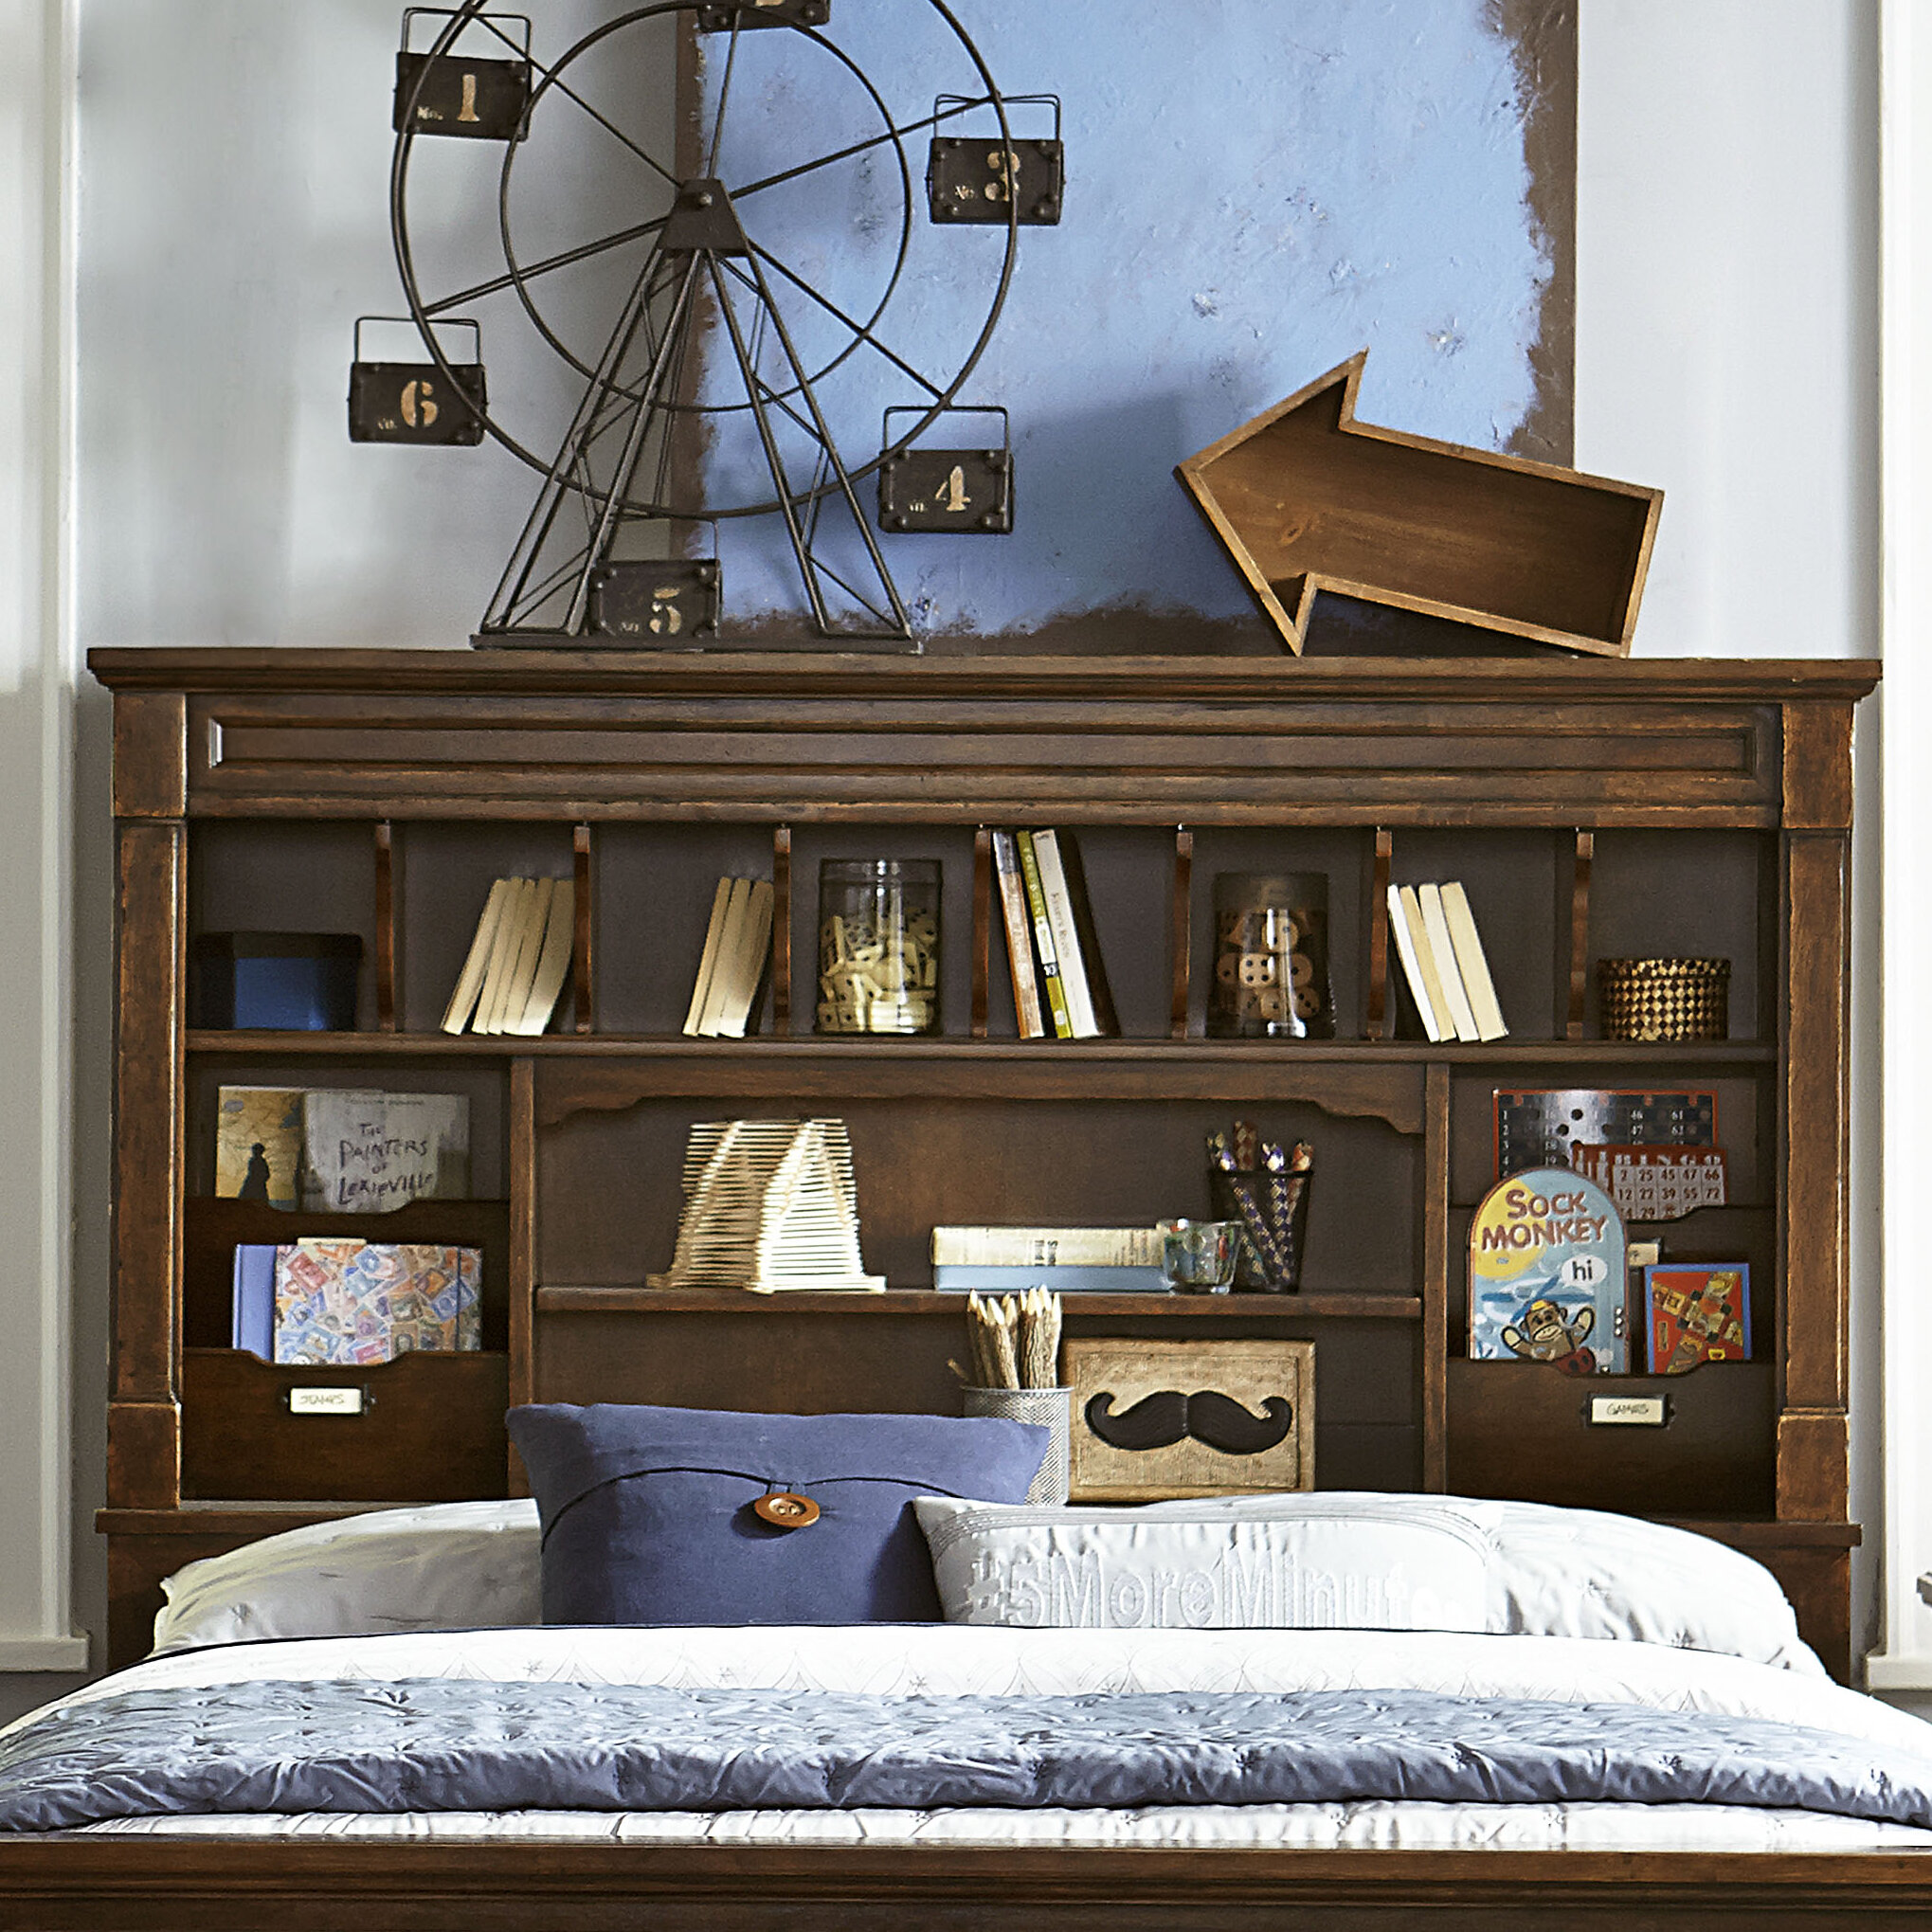 Wendy Bellissimo By Lc Kids Big Sur By Wendy Bellissimo Bookcase